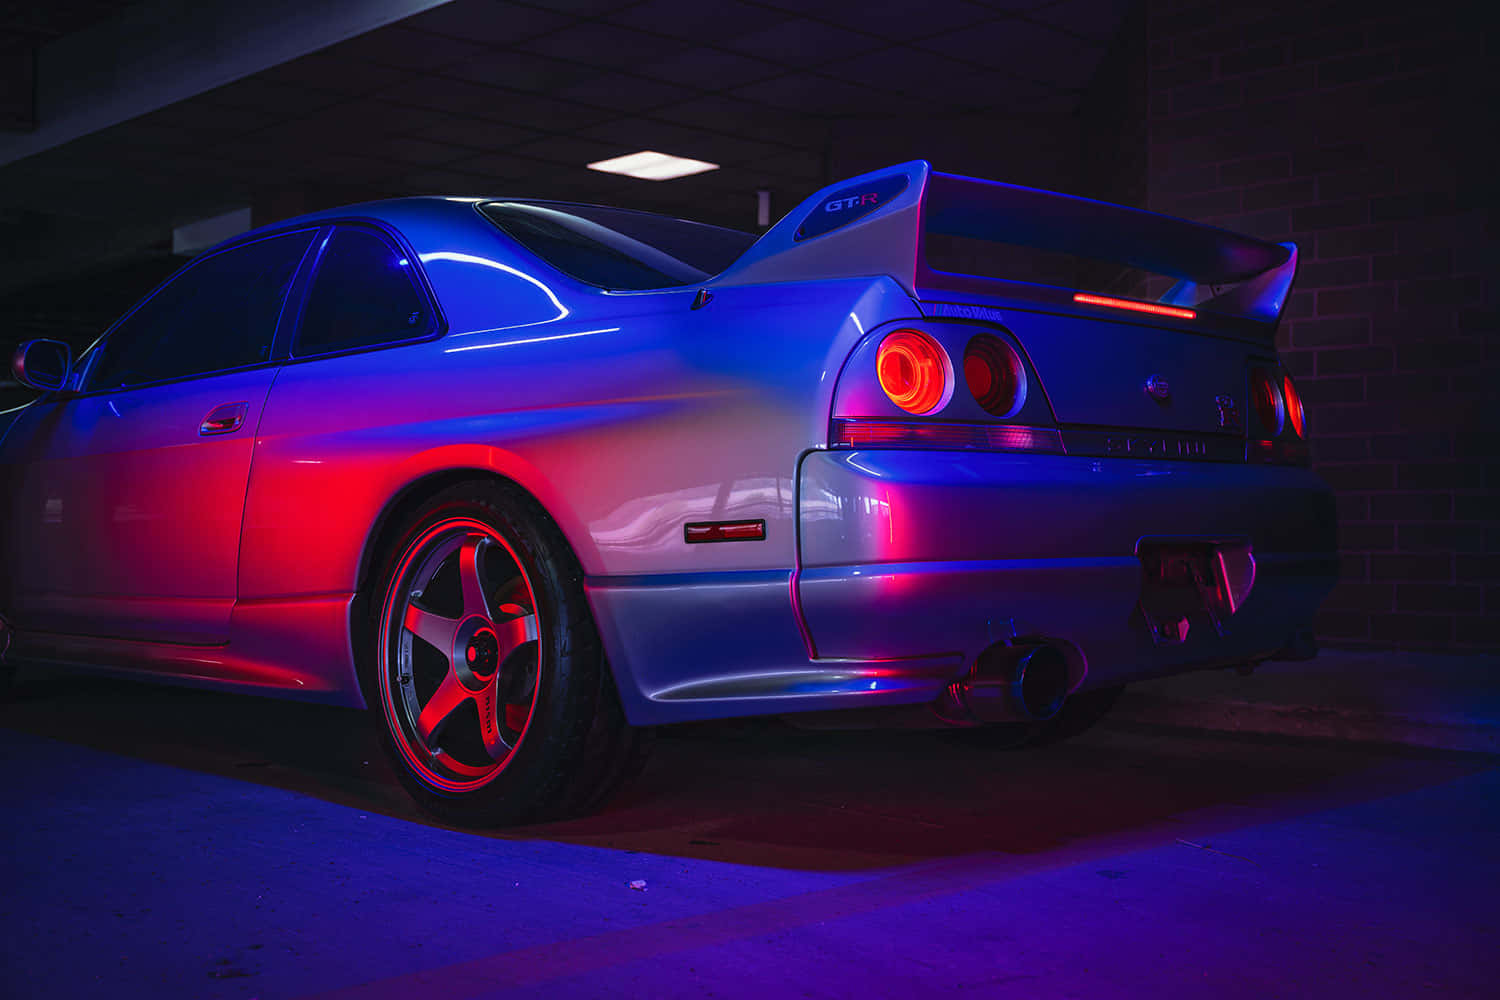 “take In The Beauty Of A Classic R33 Gtr” Wallpaper